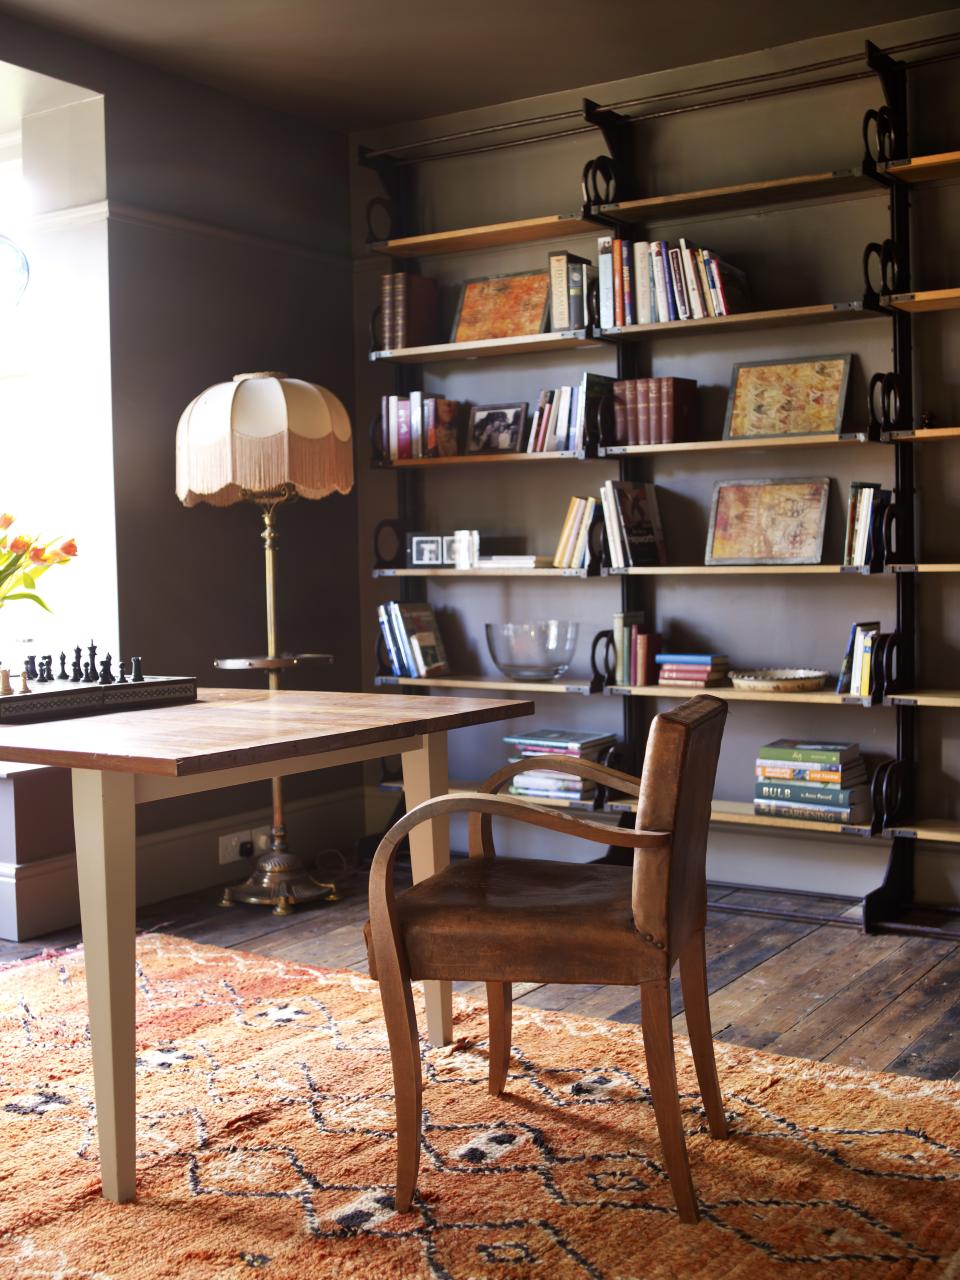 <p> Finding the perfectly sized antique or vintage bookcase for your study can be a challenge, particularly if the wall space available is large and you want to make the most of it.&#xA0; </p> <p> Maria Speake of salvage expert&#xA0;Retrouvius employs a reuse before recycle approach, scouring the country for discarded gems that might be re-imagined in different formats. </p> <p> This fully-adjustable industrial shelving system &#x2013; which can be configured in a number of ways &#x2013; was reclaimed from an office and re-homed in this farmhouse, where it beautifully complements the timeless feel. </p>